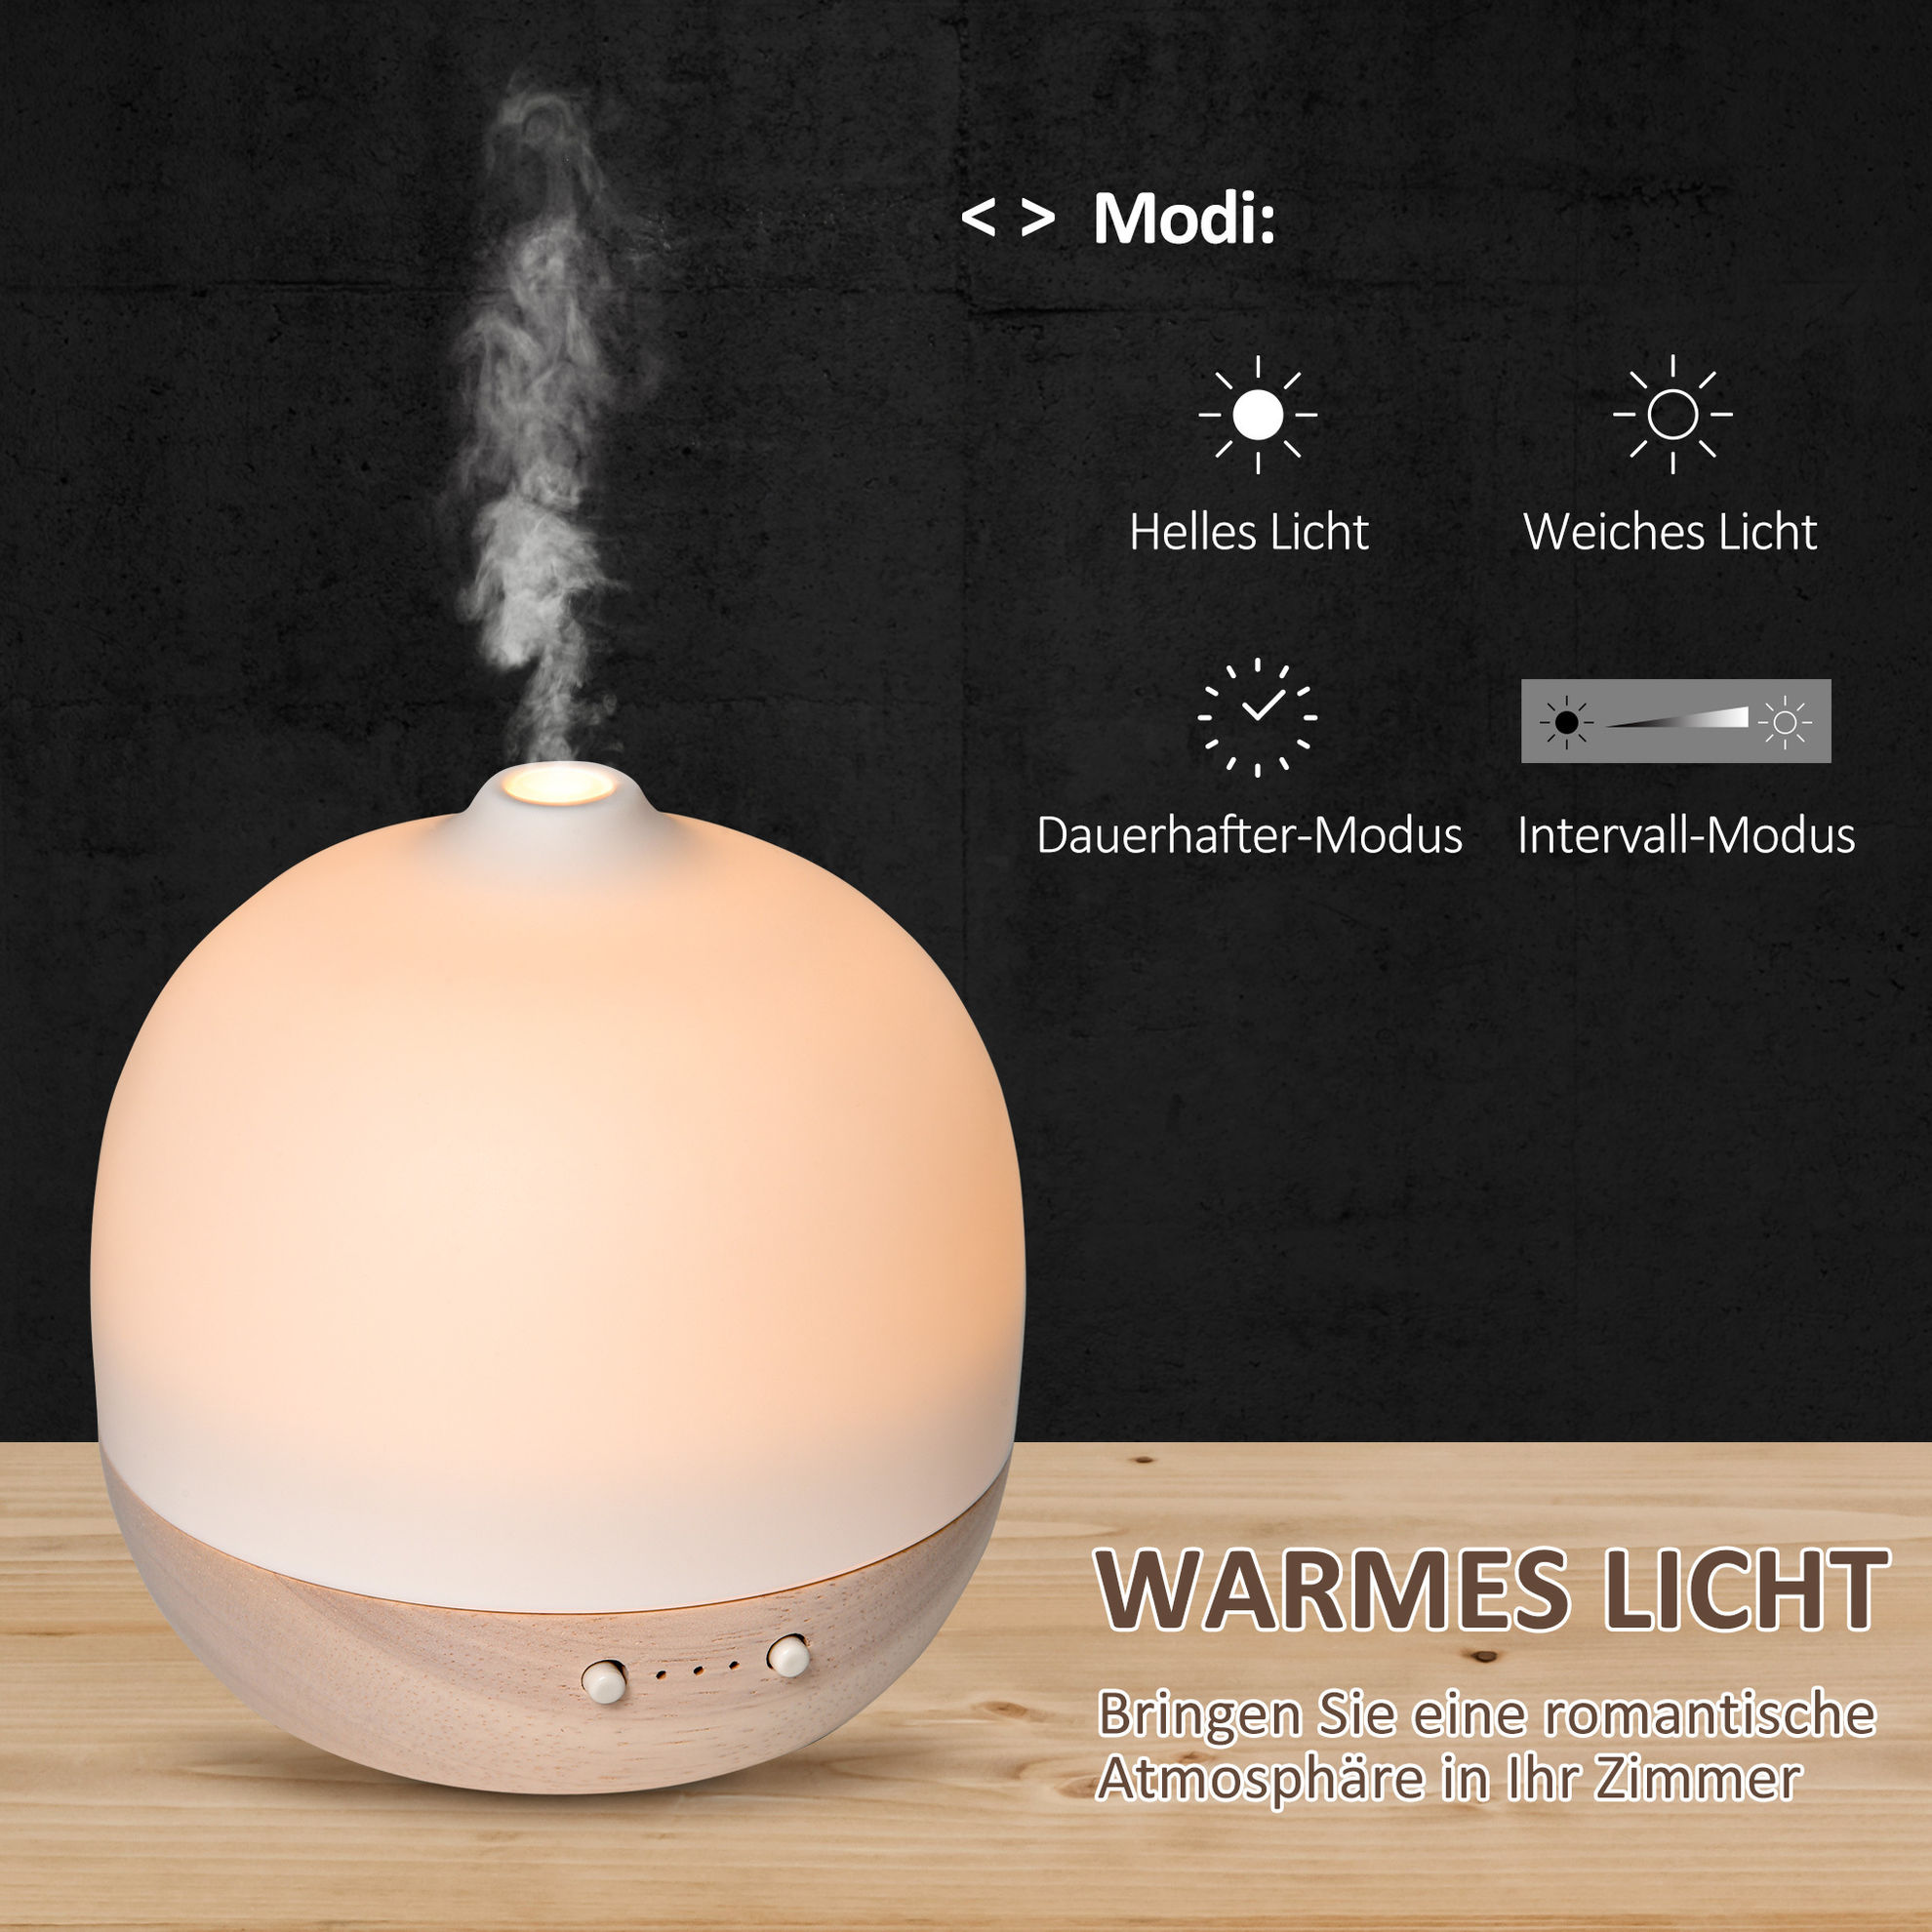 Aroma Diffusor 2-in-1 Funktion, 7 LED Farben, auto-abschaltung